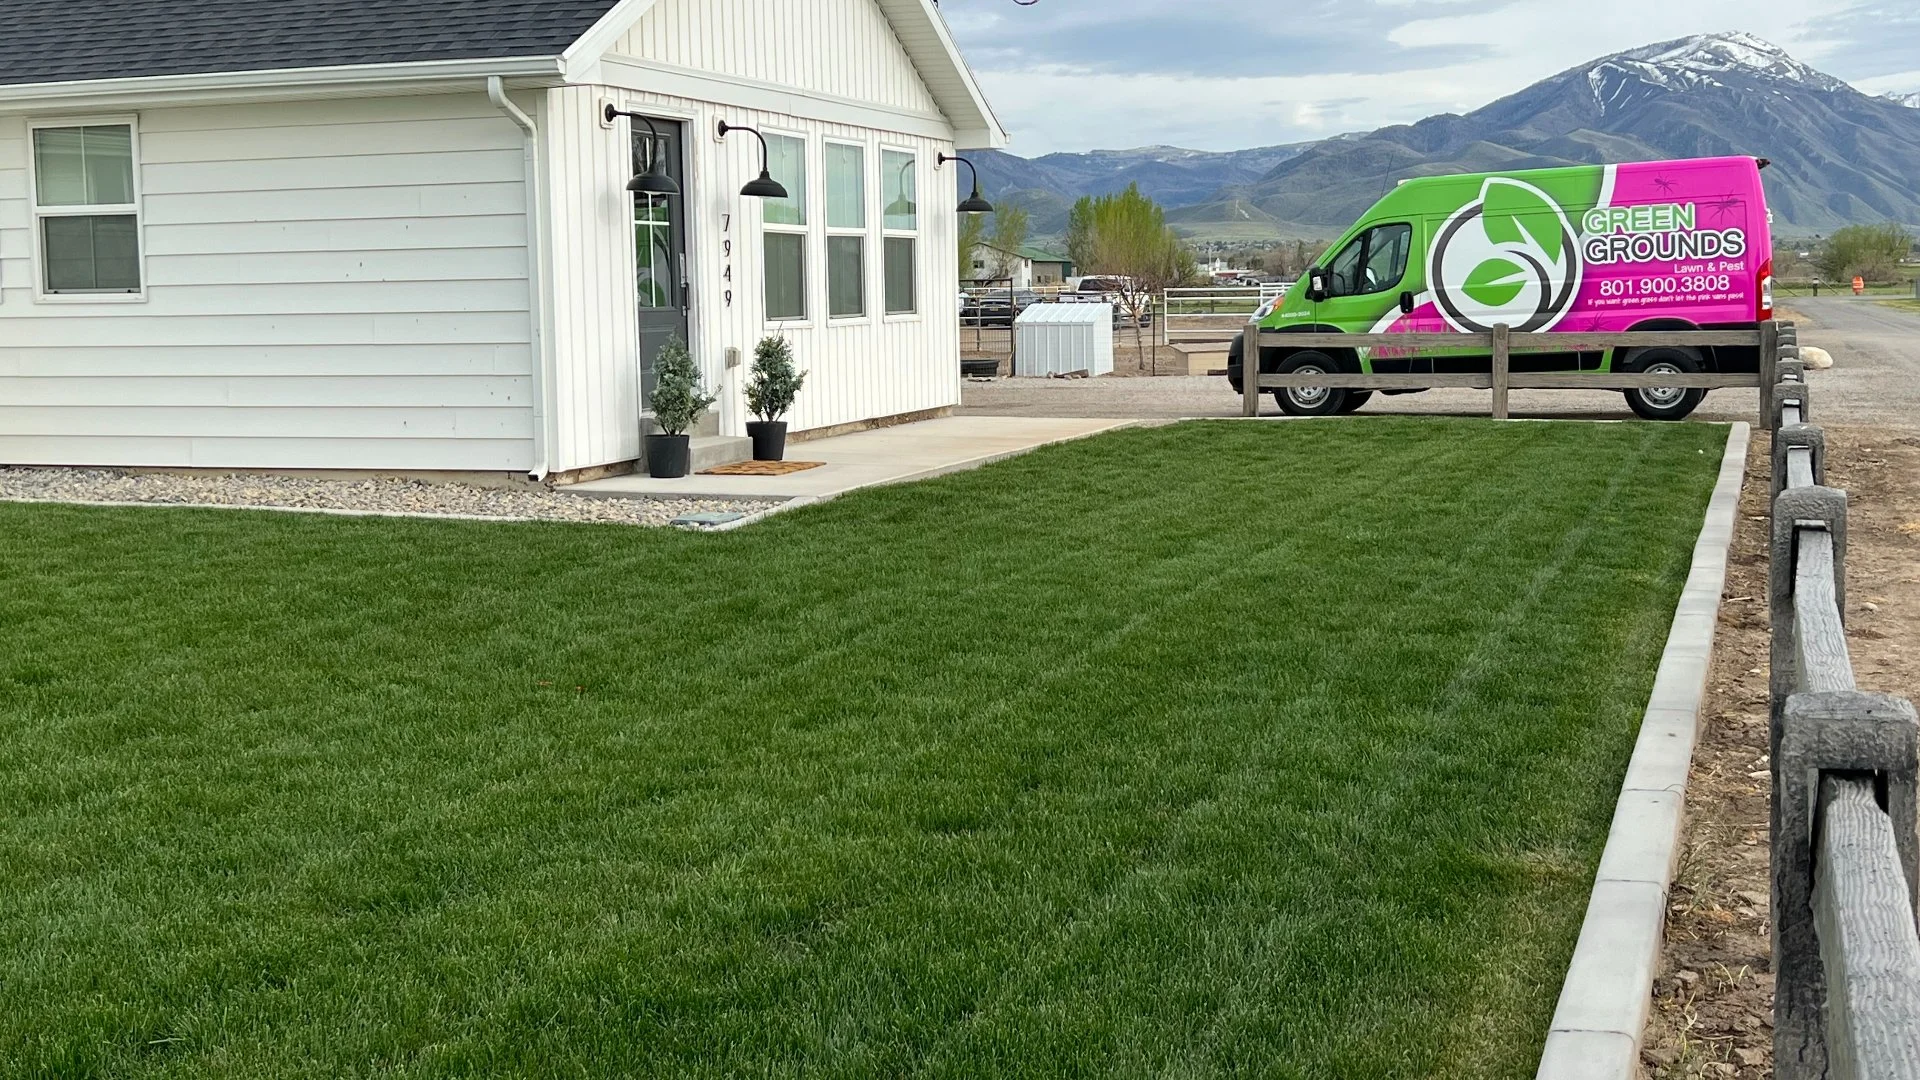 Home in Herber, UT with a healthy lawn.